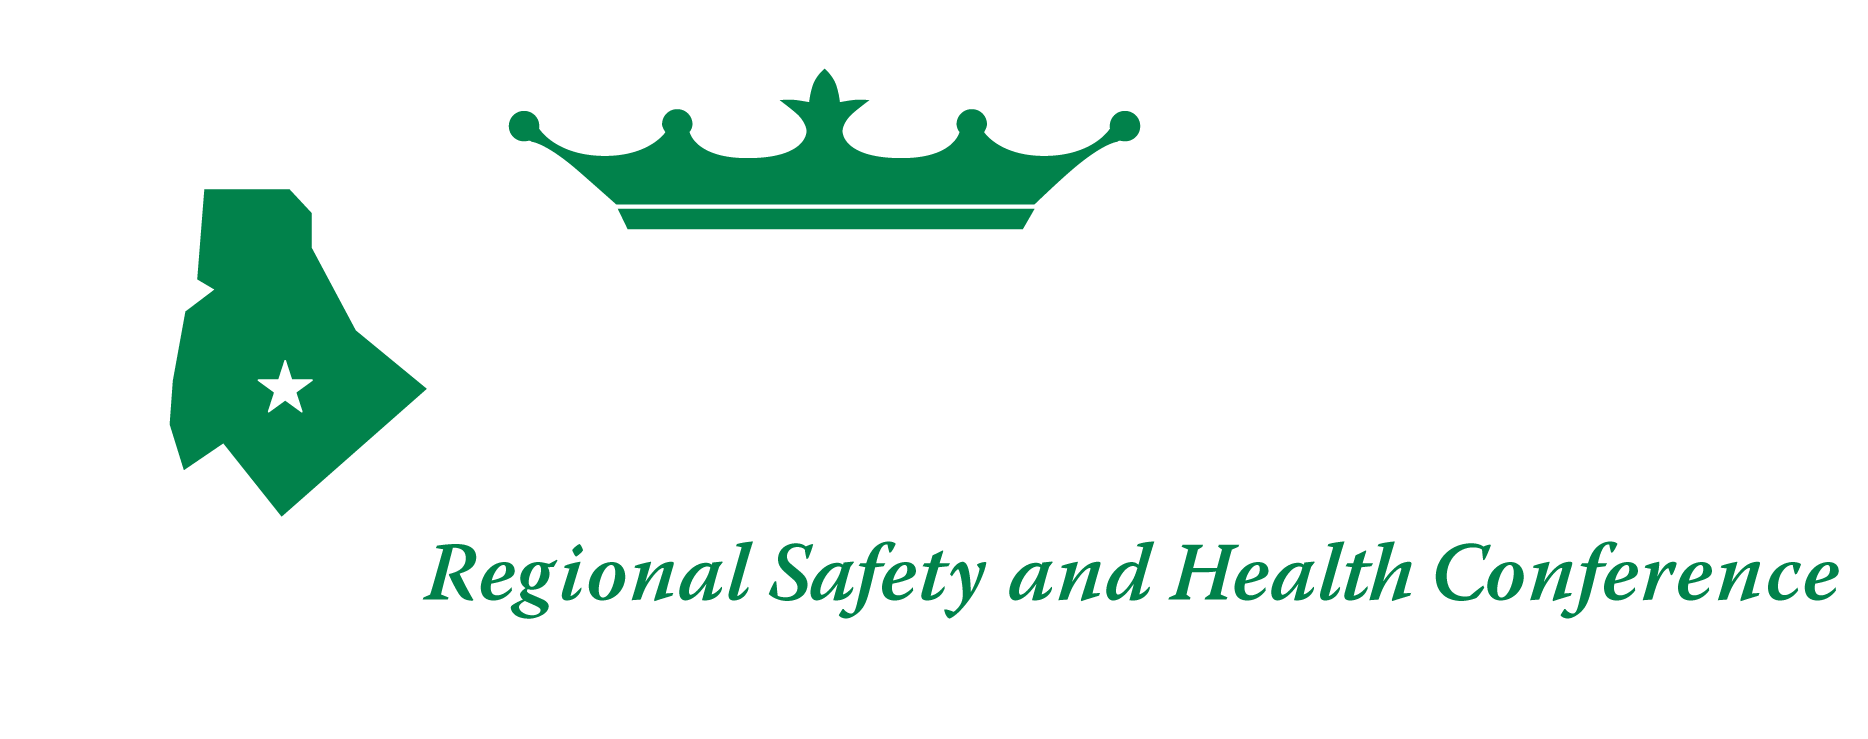 Charlotte Regional Safety and Health Conference Logo